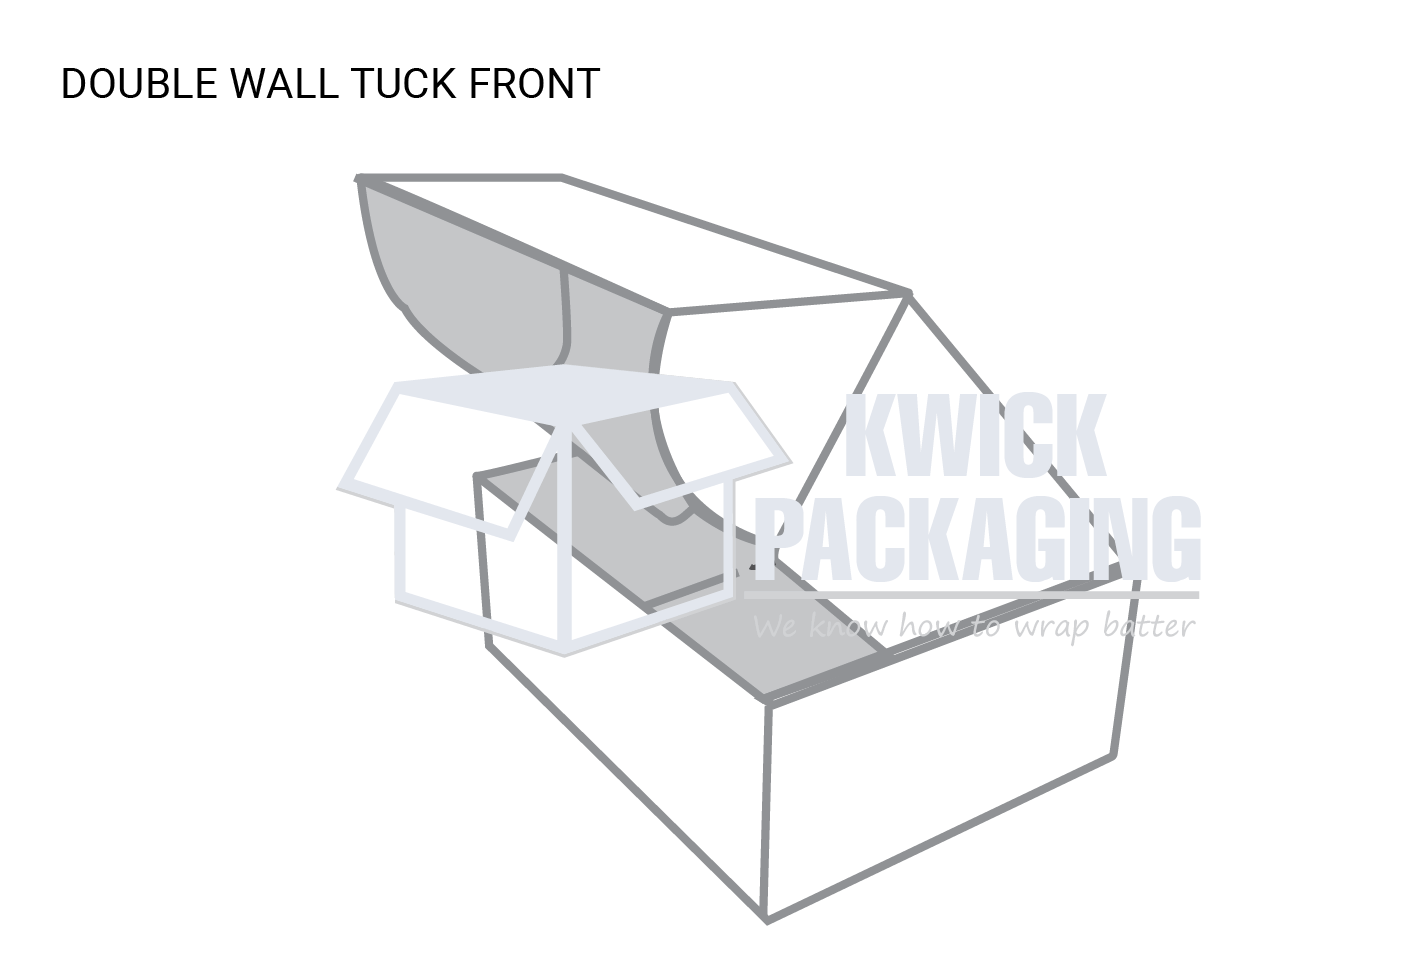 Custom Double Wall Tuck Front Template